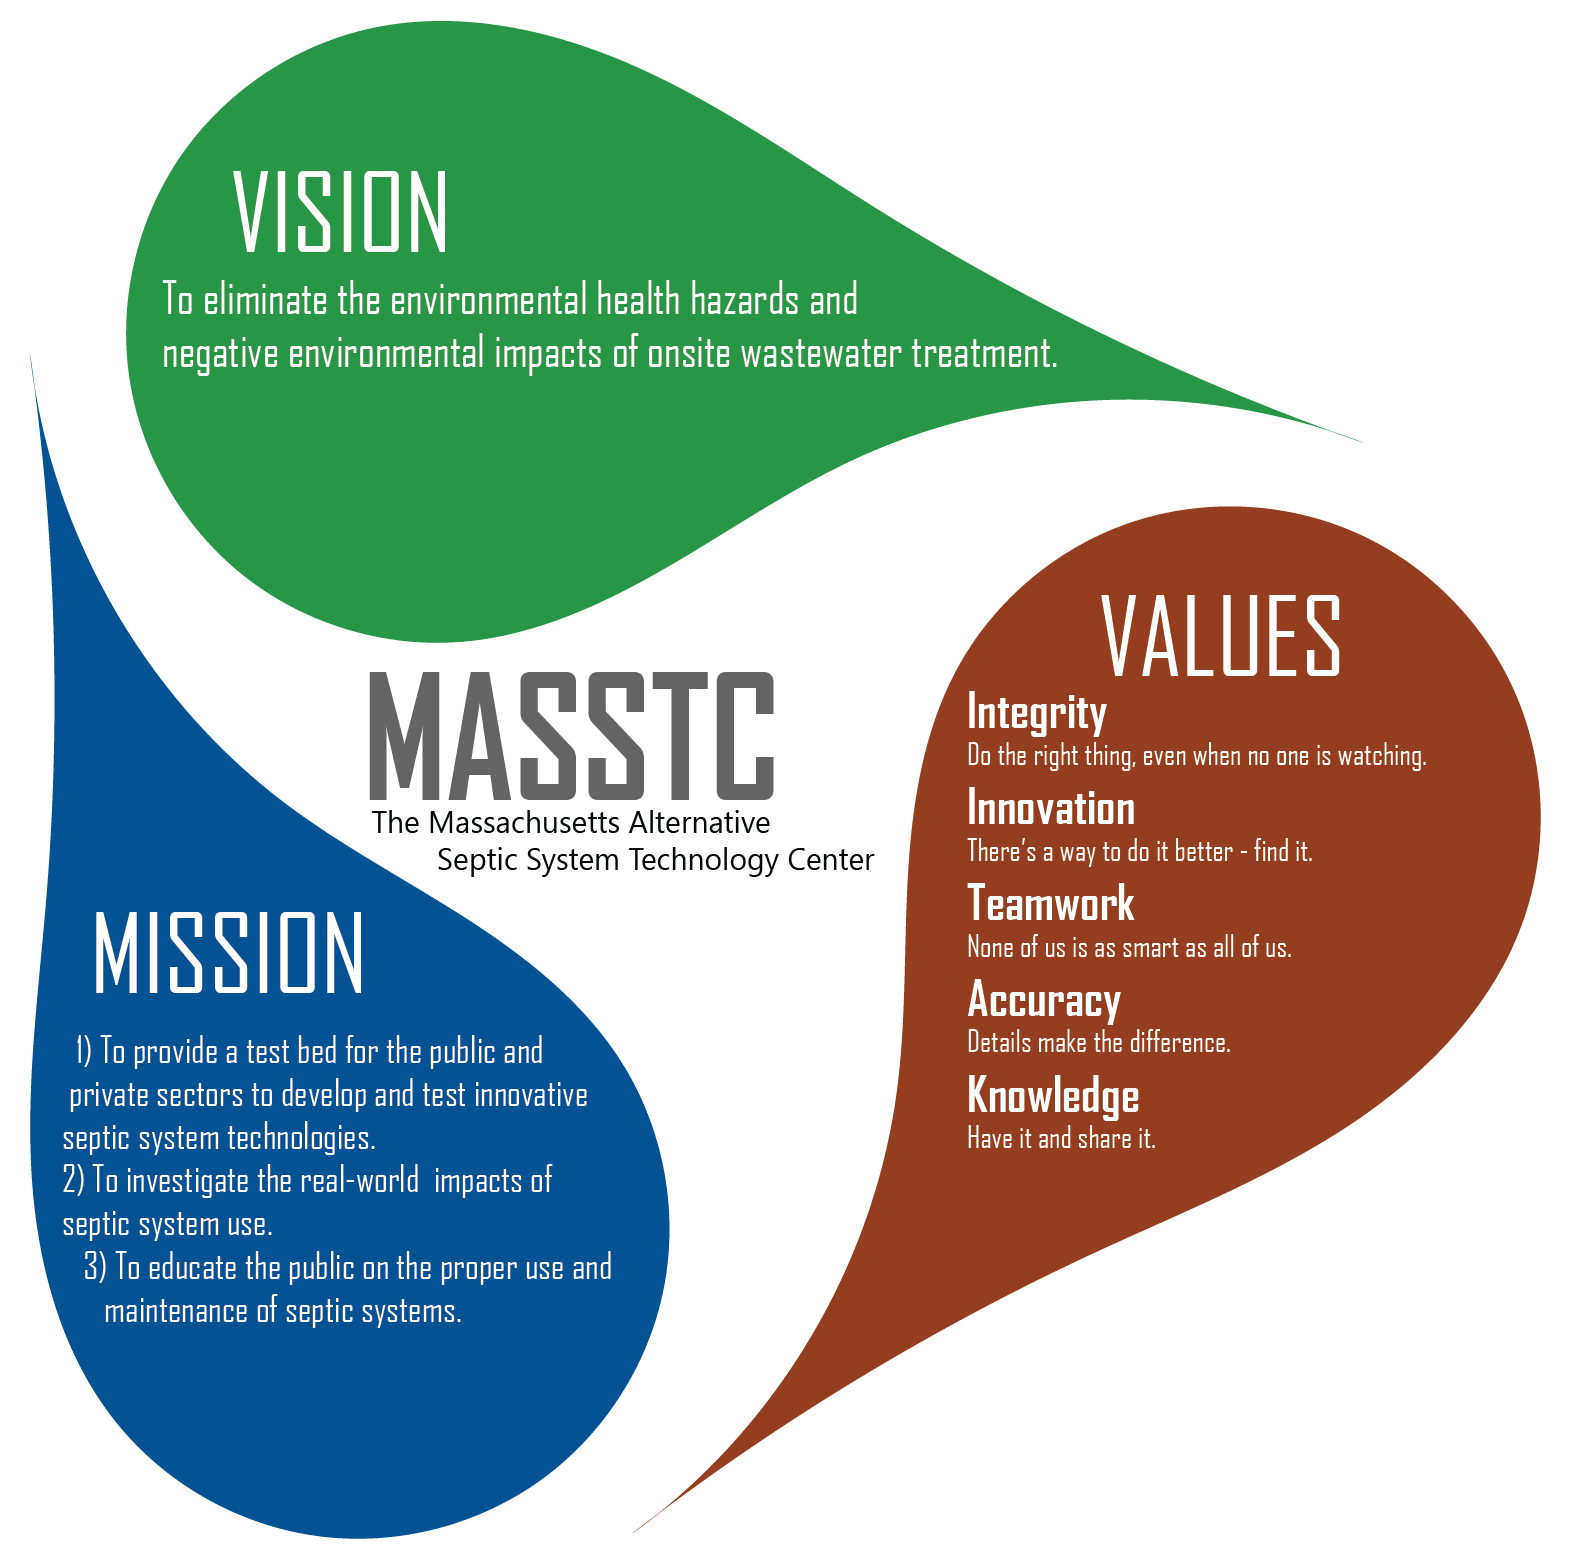 //www.masstc.org/wp-content/uploads/2017/03/vision-mission-values-1.png